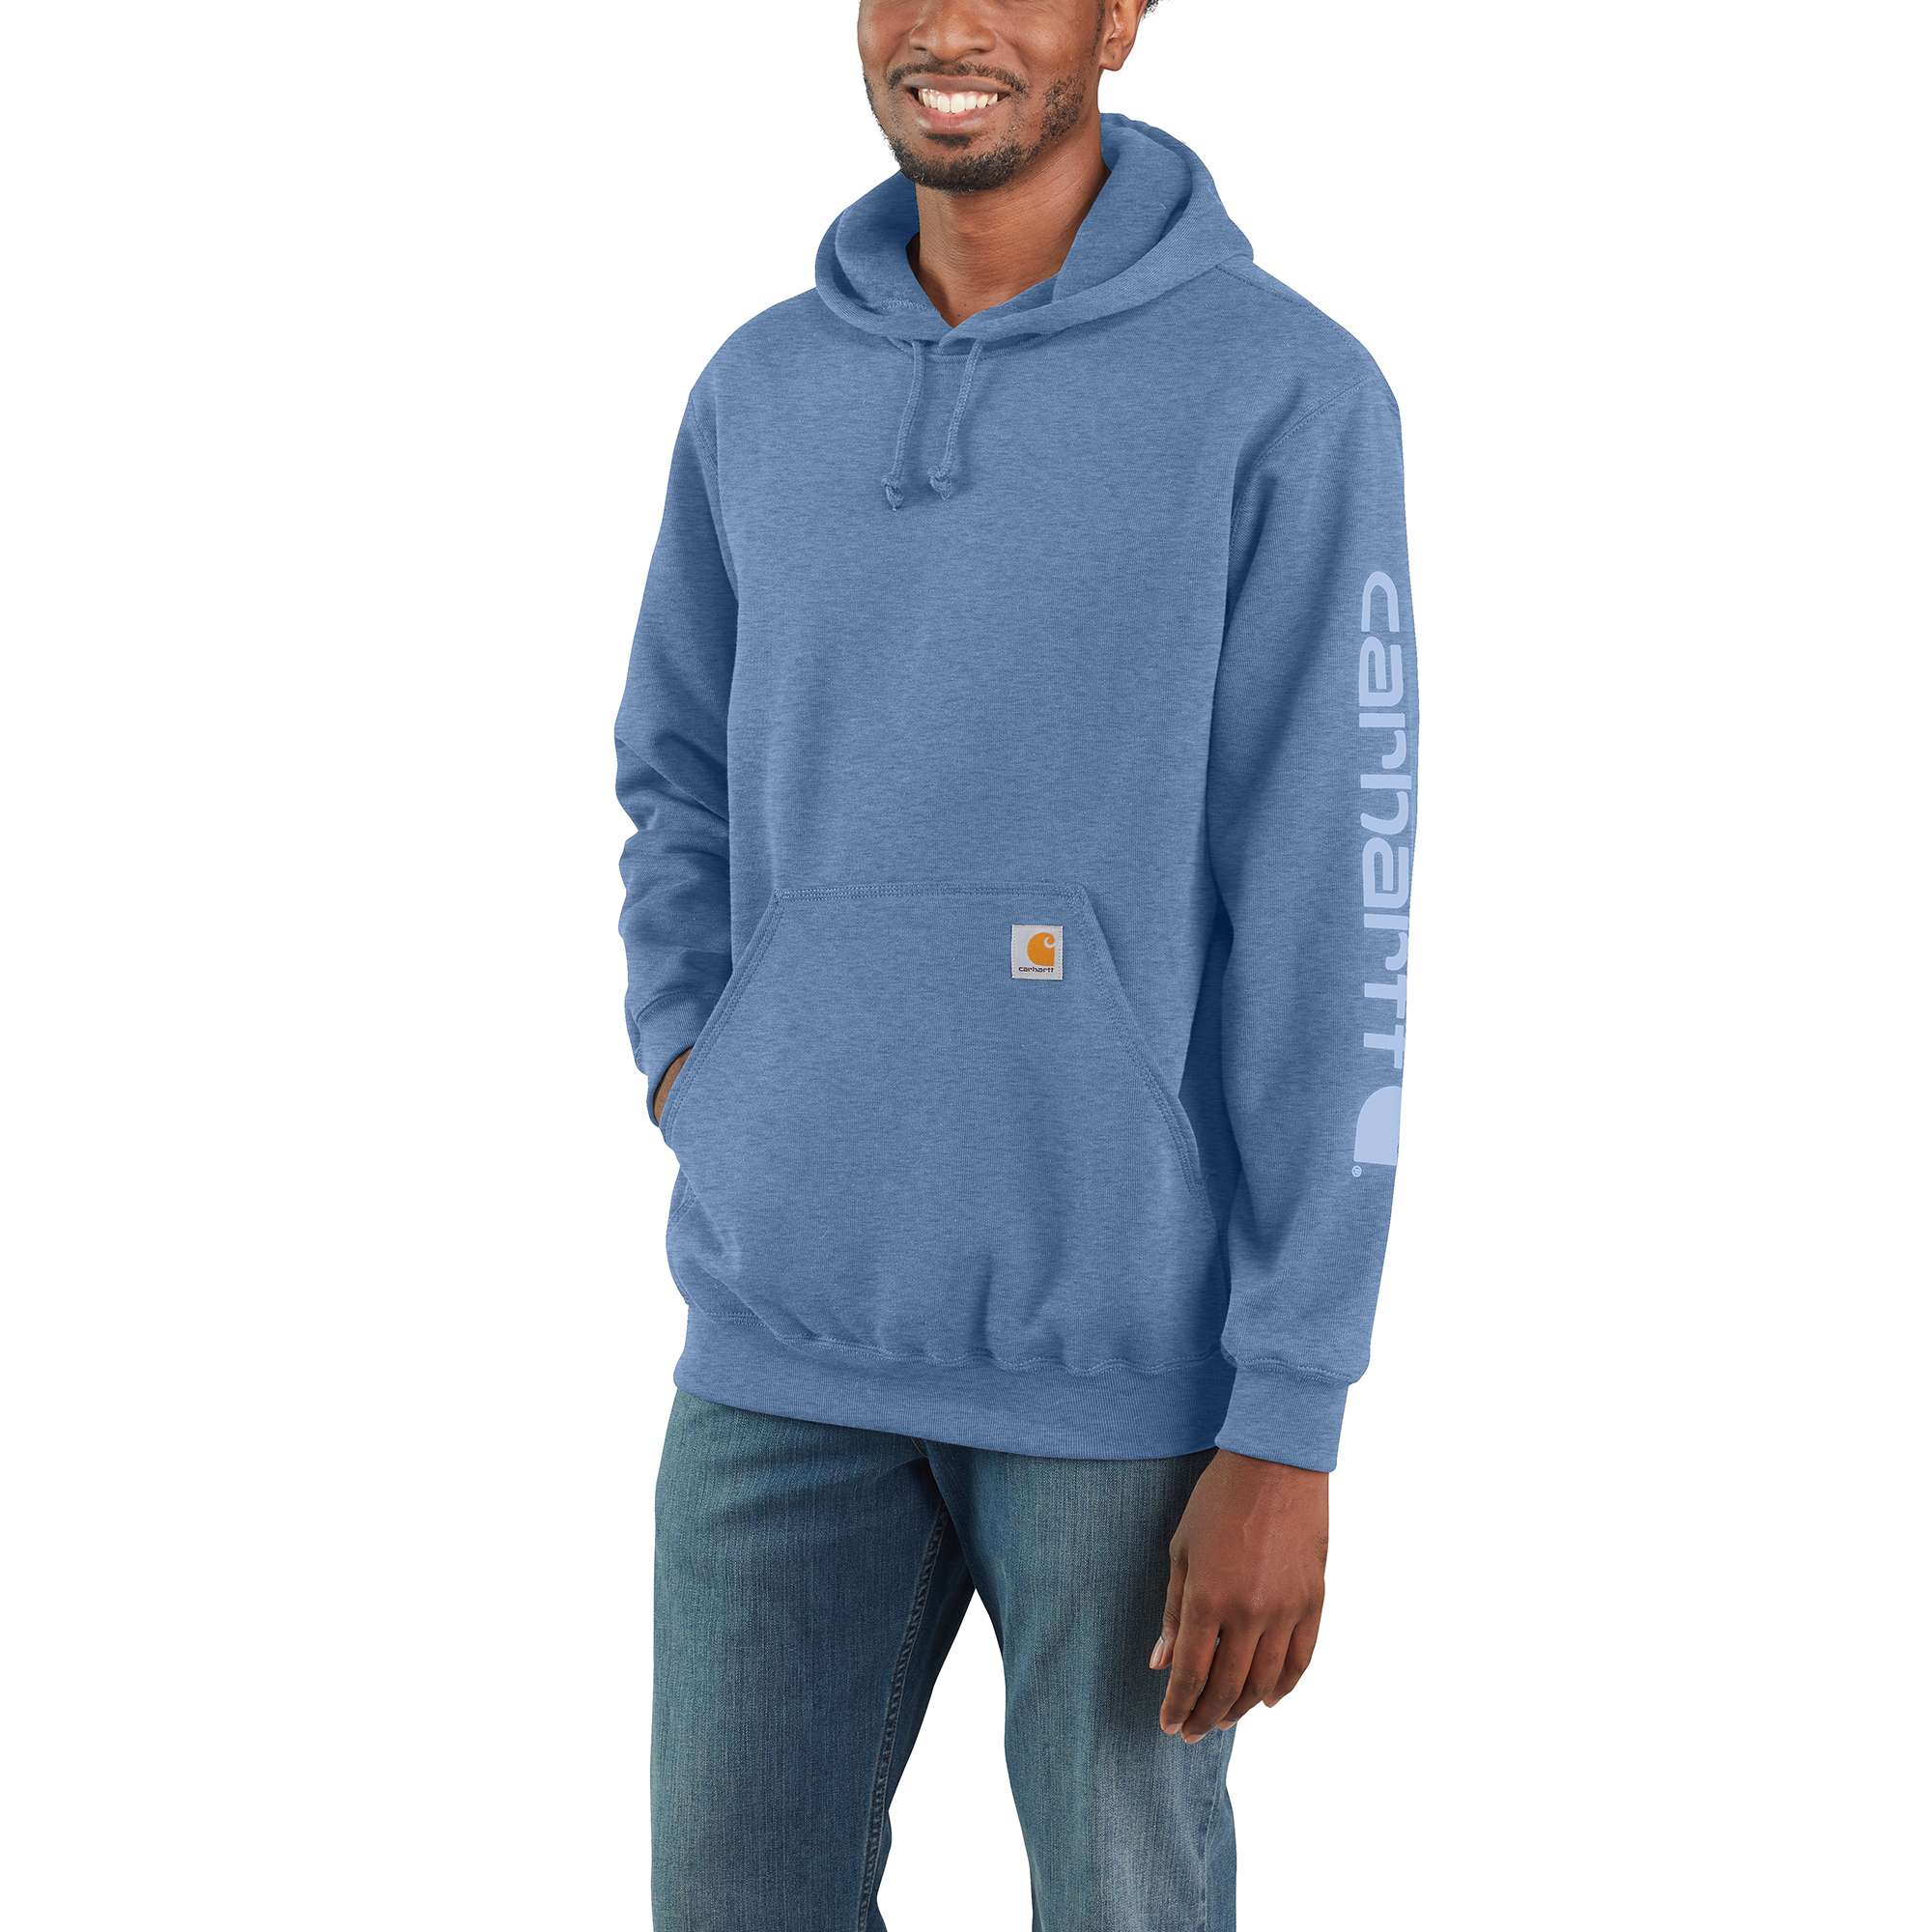 Men's Workwear and Work Clothes | Carhartt